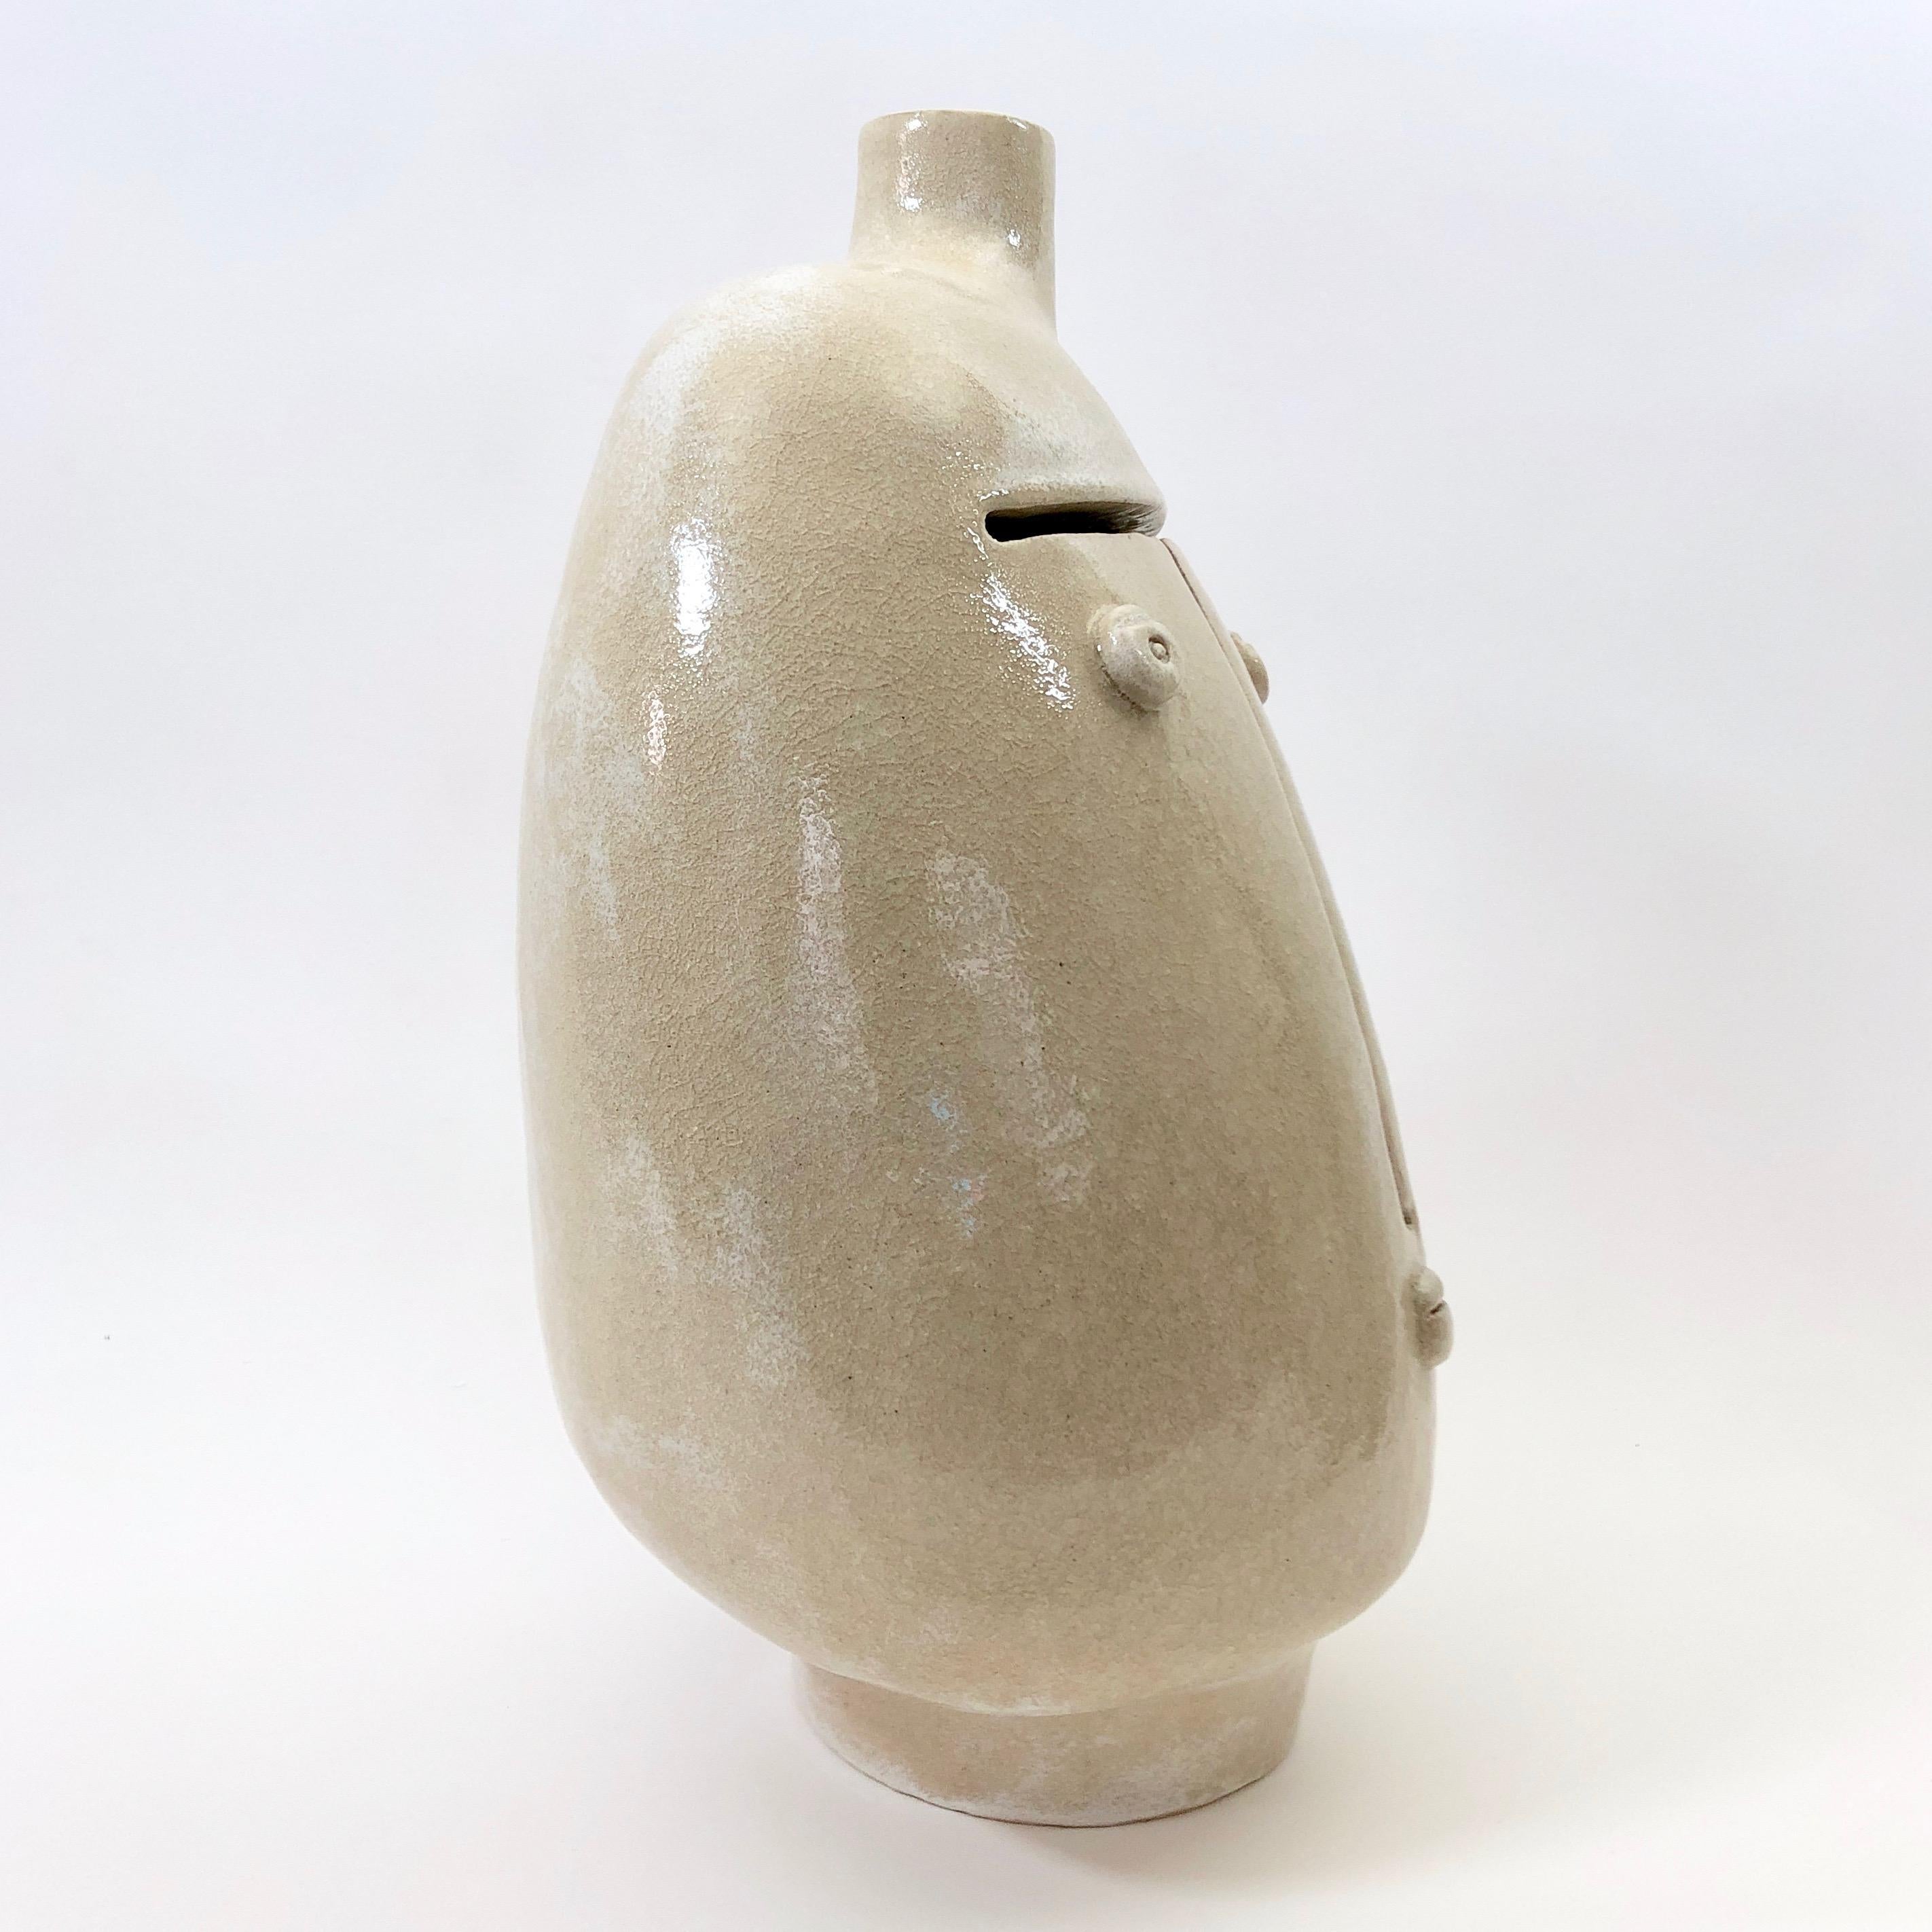 Important pottery sculpture, forming a table lamp base.
Ceramic glazed in cloudy beige spotted background, with a melted glass effect during glaze firing ; decorated with a figurative visage sculpted front and a small medallion engraved back. 

One